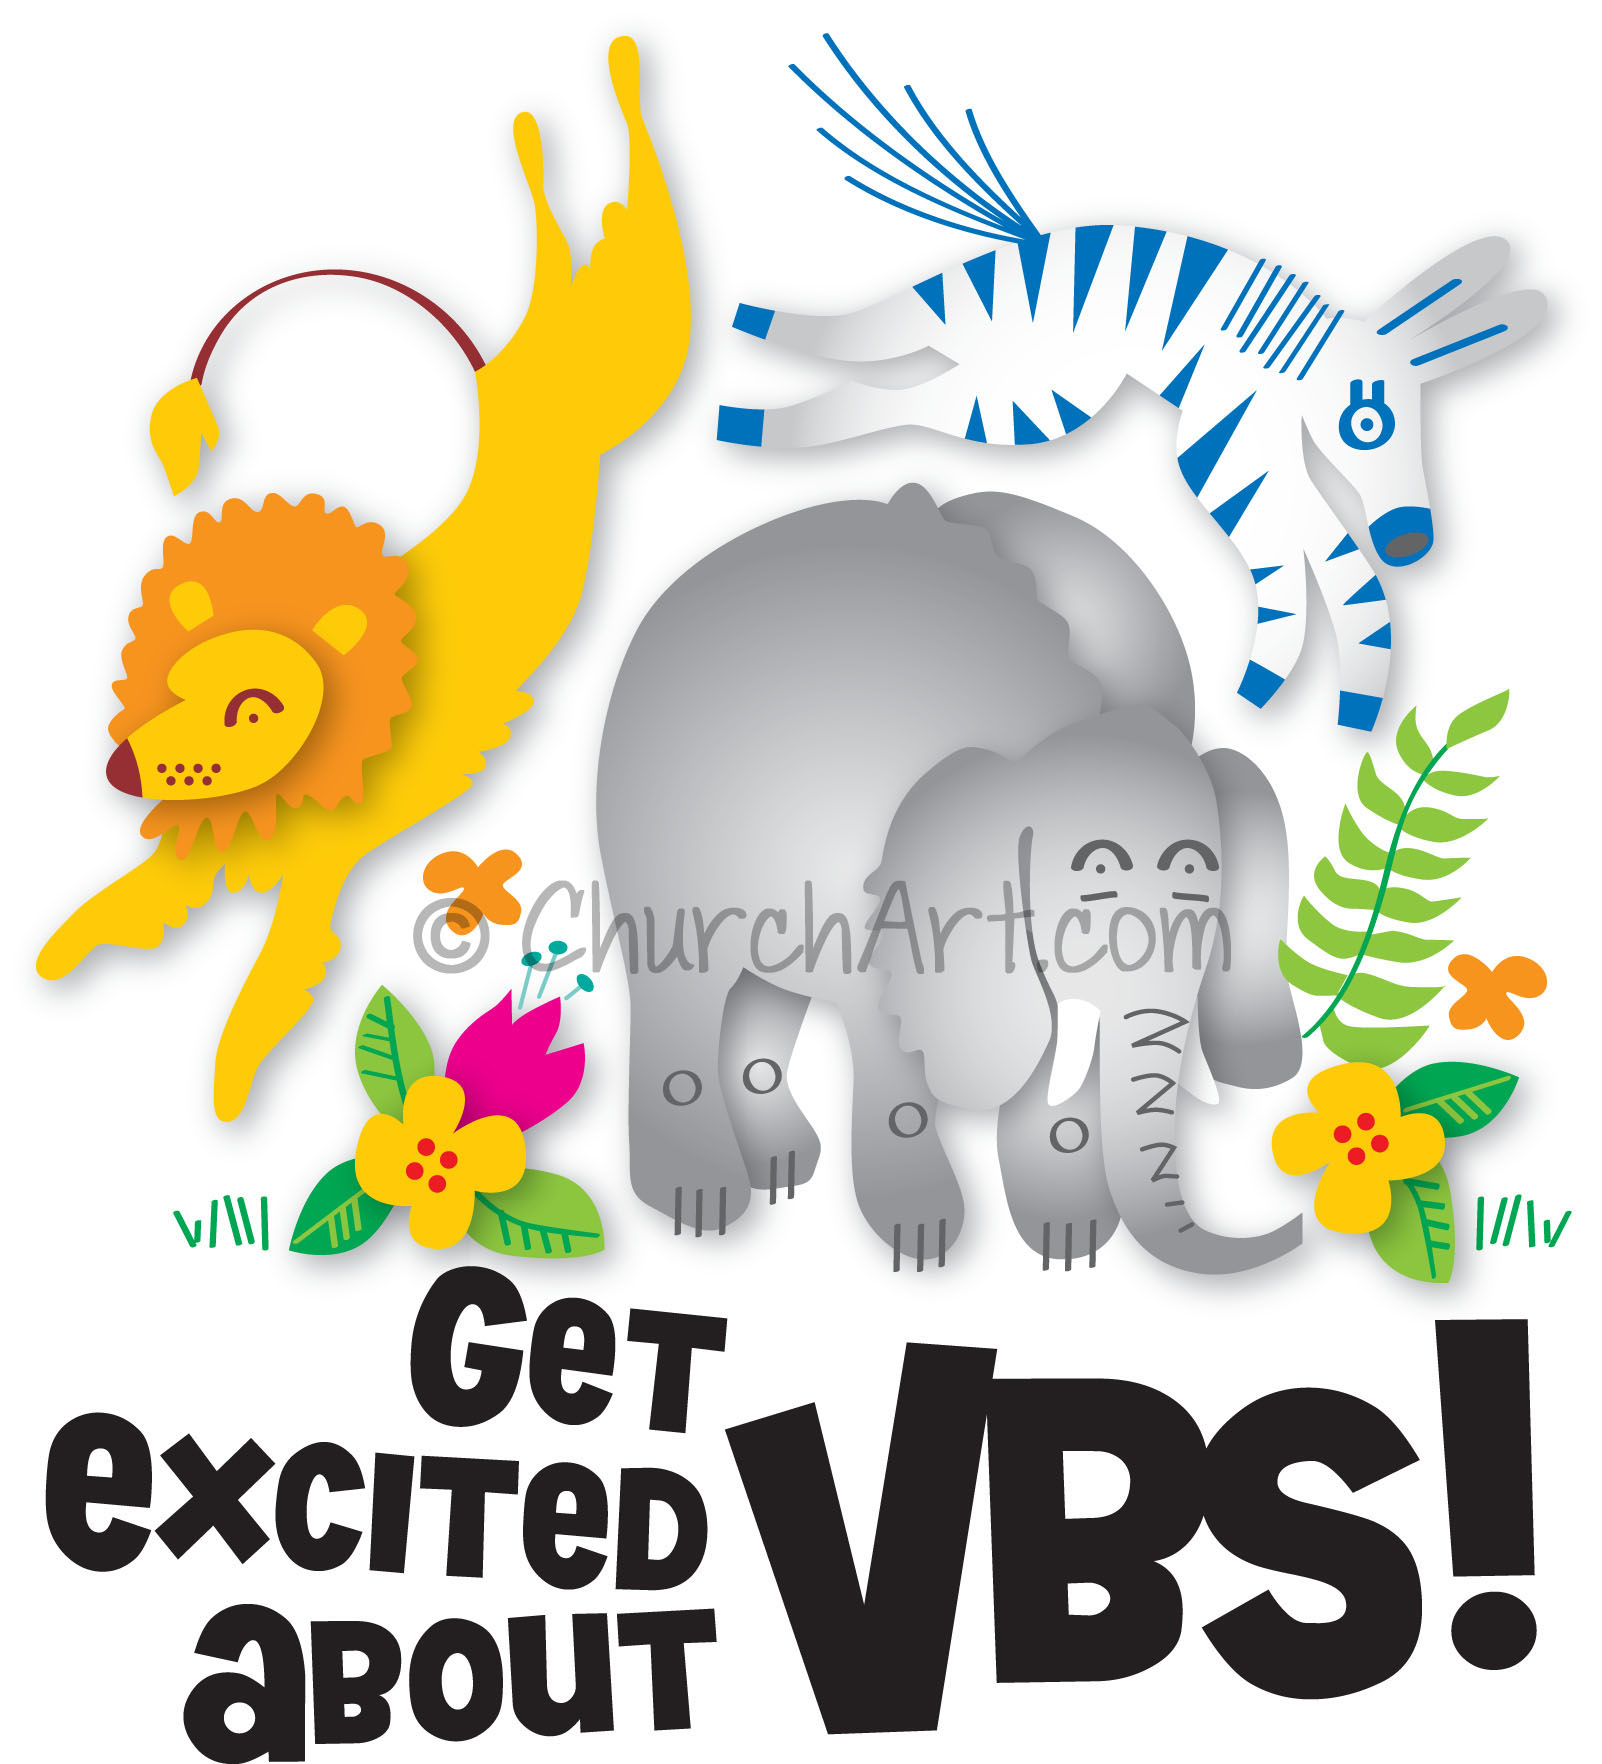 Get excited about VBS clipart for kids and adults